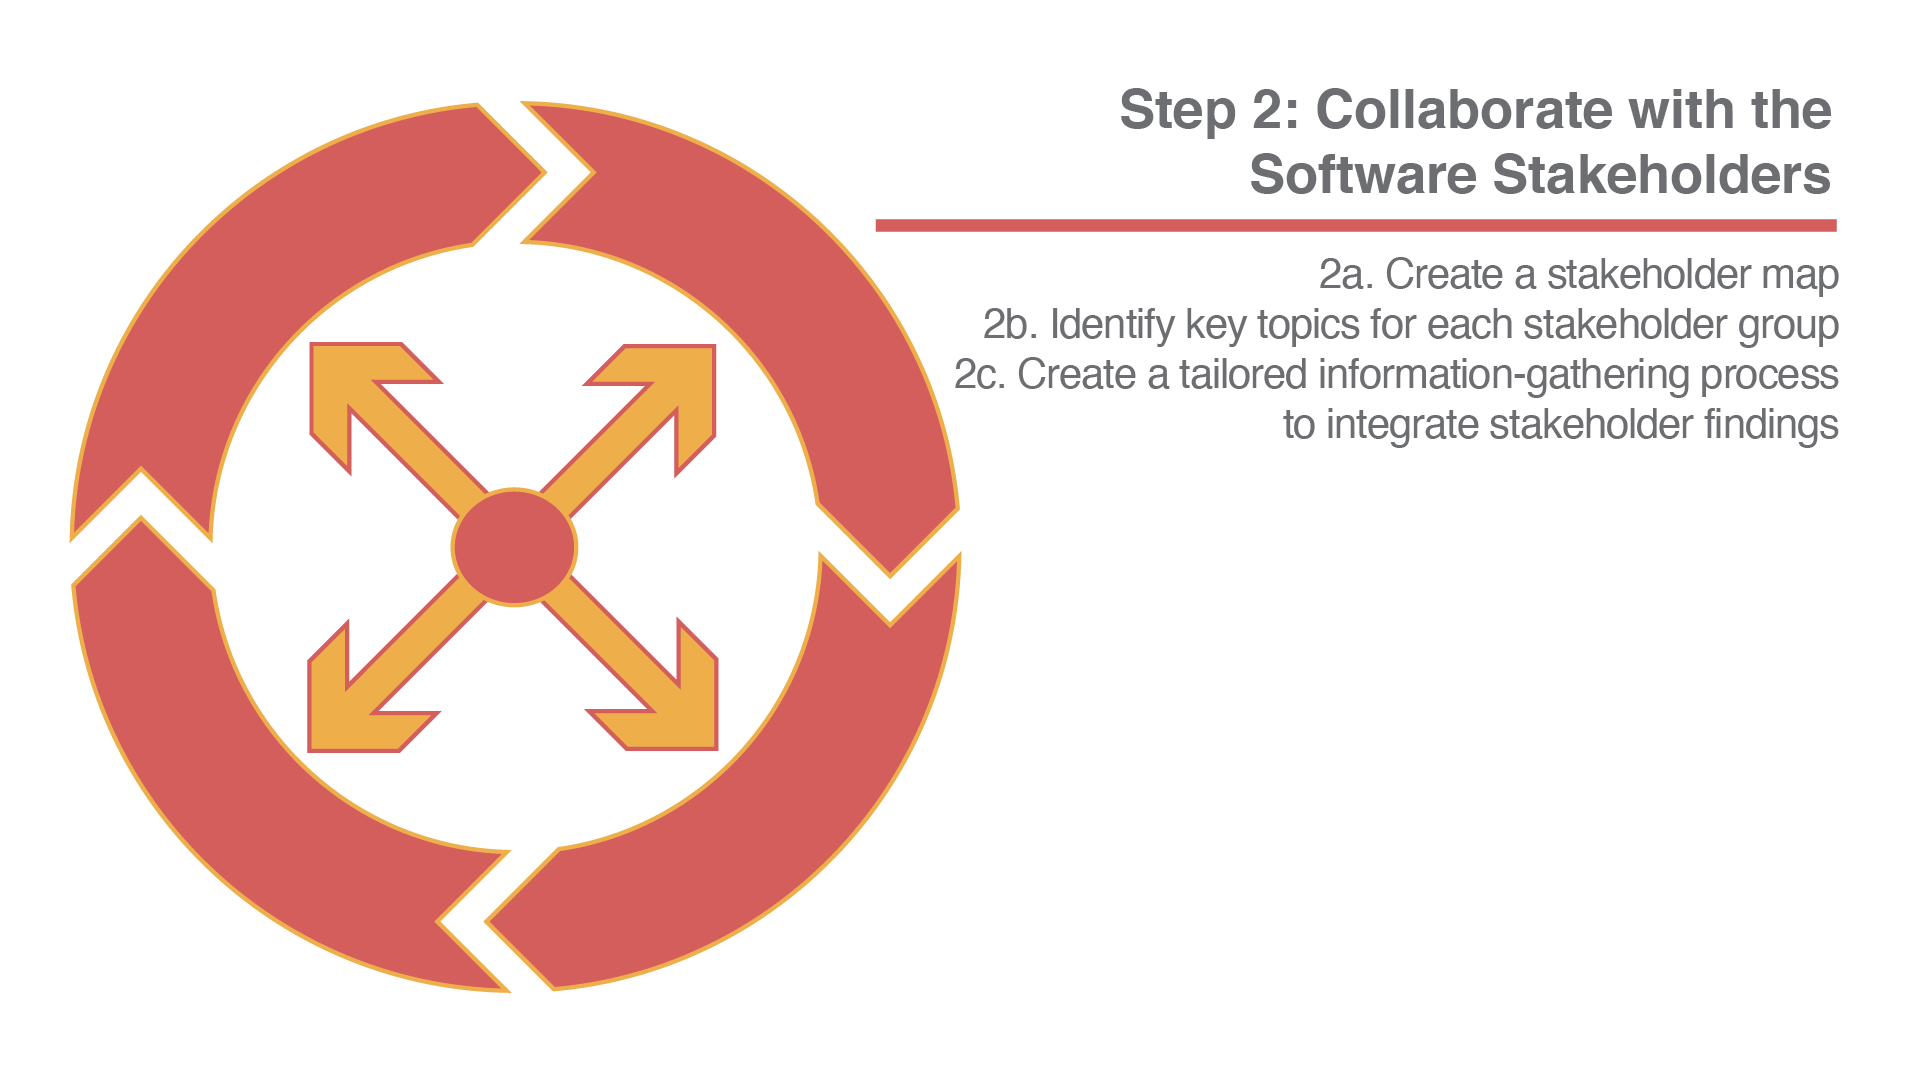 Step 2 diagram: Collaborate with the Software Stakeholders